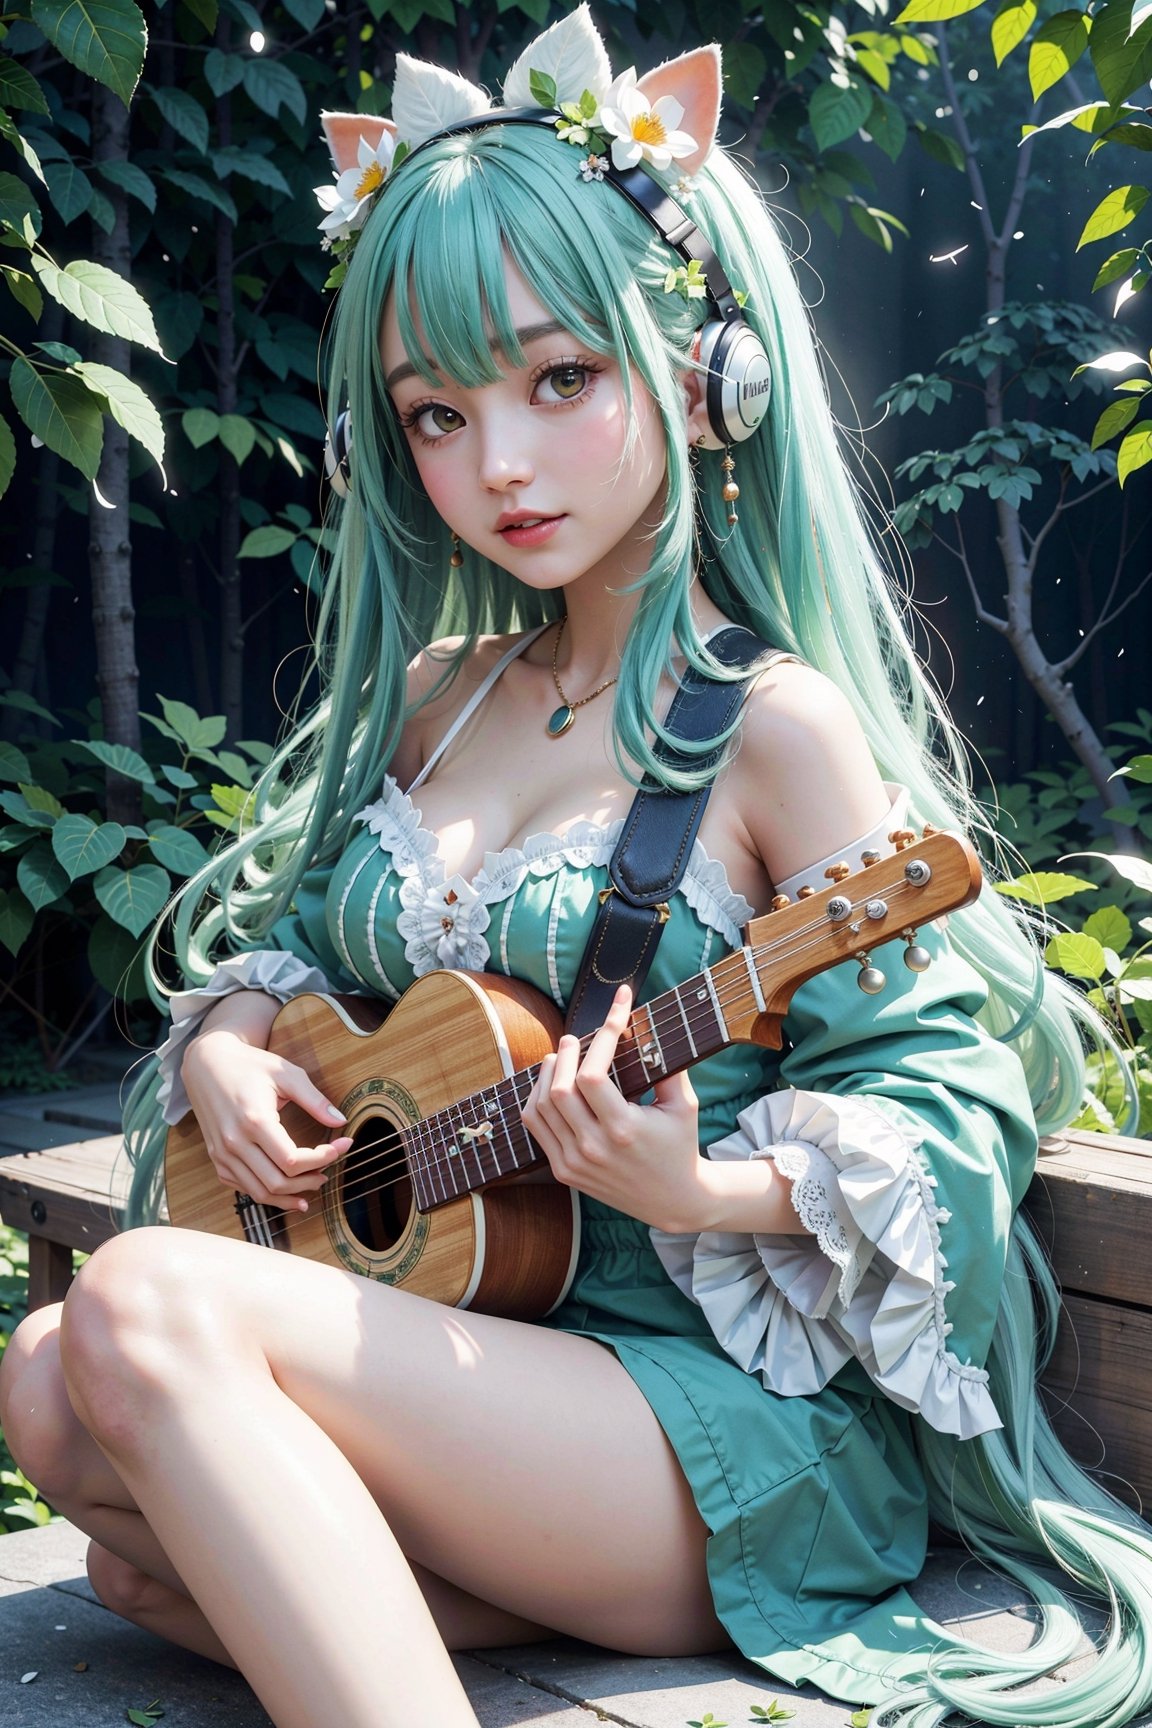 (masterpiece, best quality, highres:1.3), ultra resolution image, (1girl), (solo), kawaii, green flowing hair, long hair,huge breast, lute,cute face, musical, surrounded by music notes, (music filling the air:1.5), fantasy, harmony, melody, soft, night time, (serene background:1.3), vivid color, sitting, (magical, musical aura:1.3), smile softly, forest, leaf, bird on head, nature, sitting